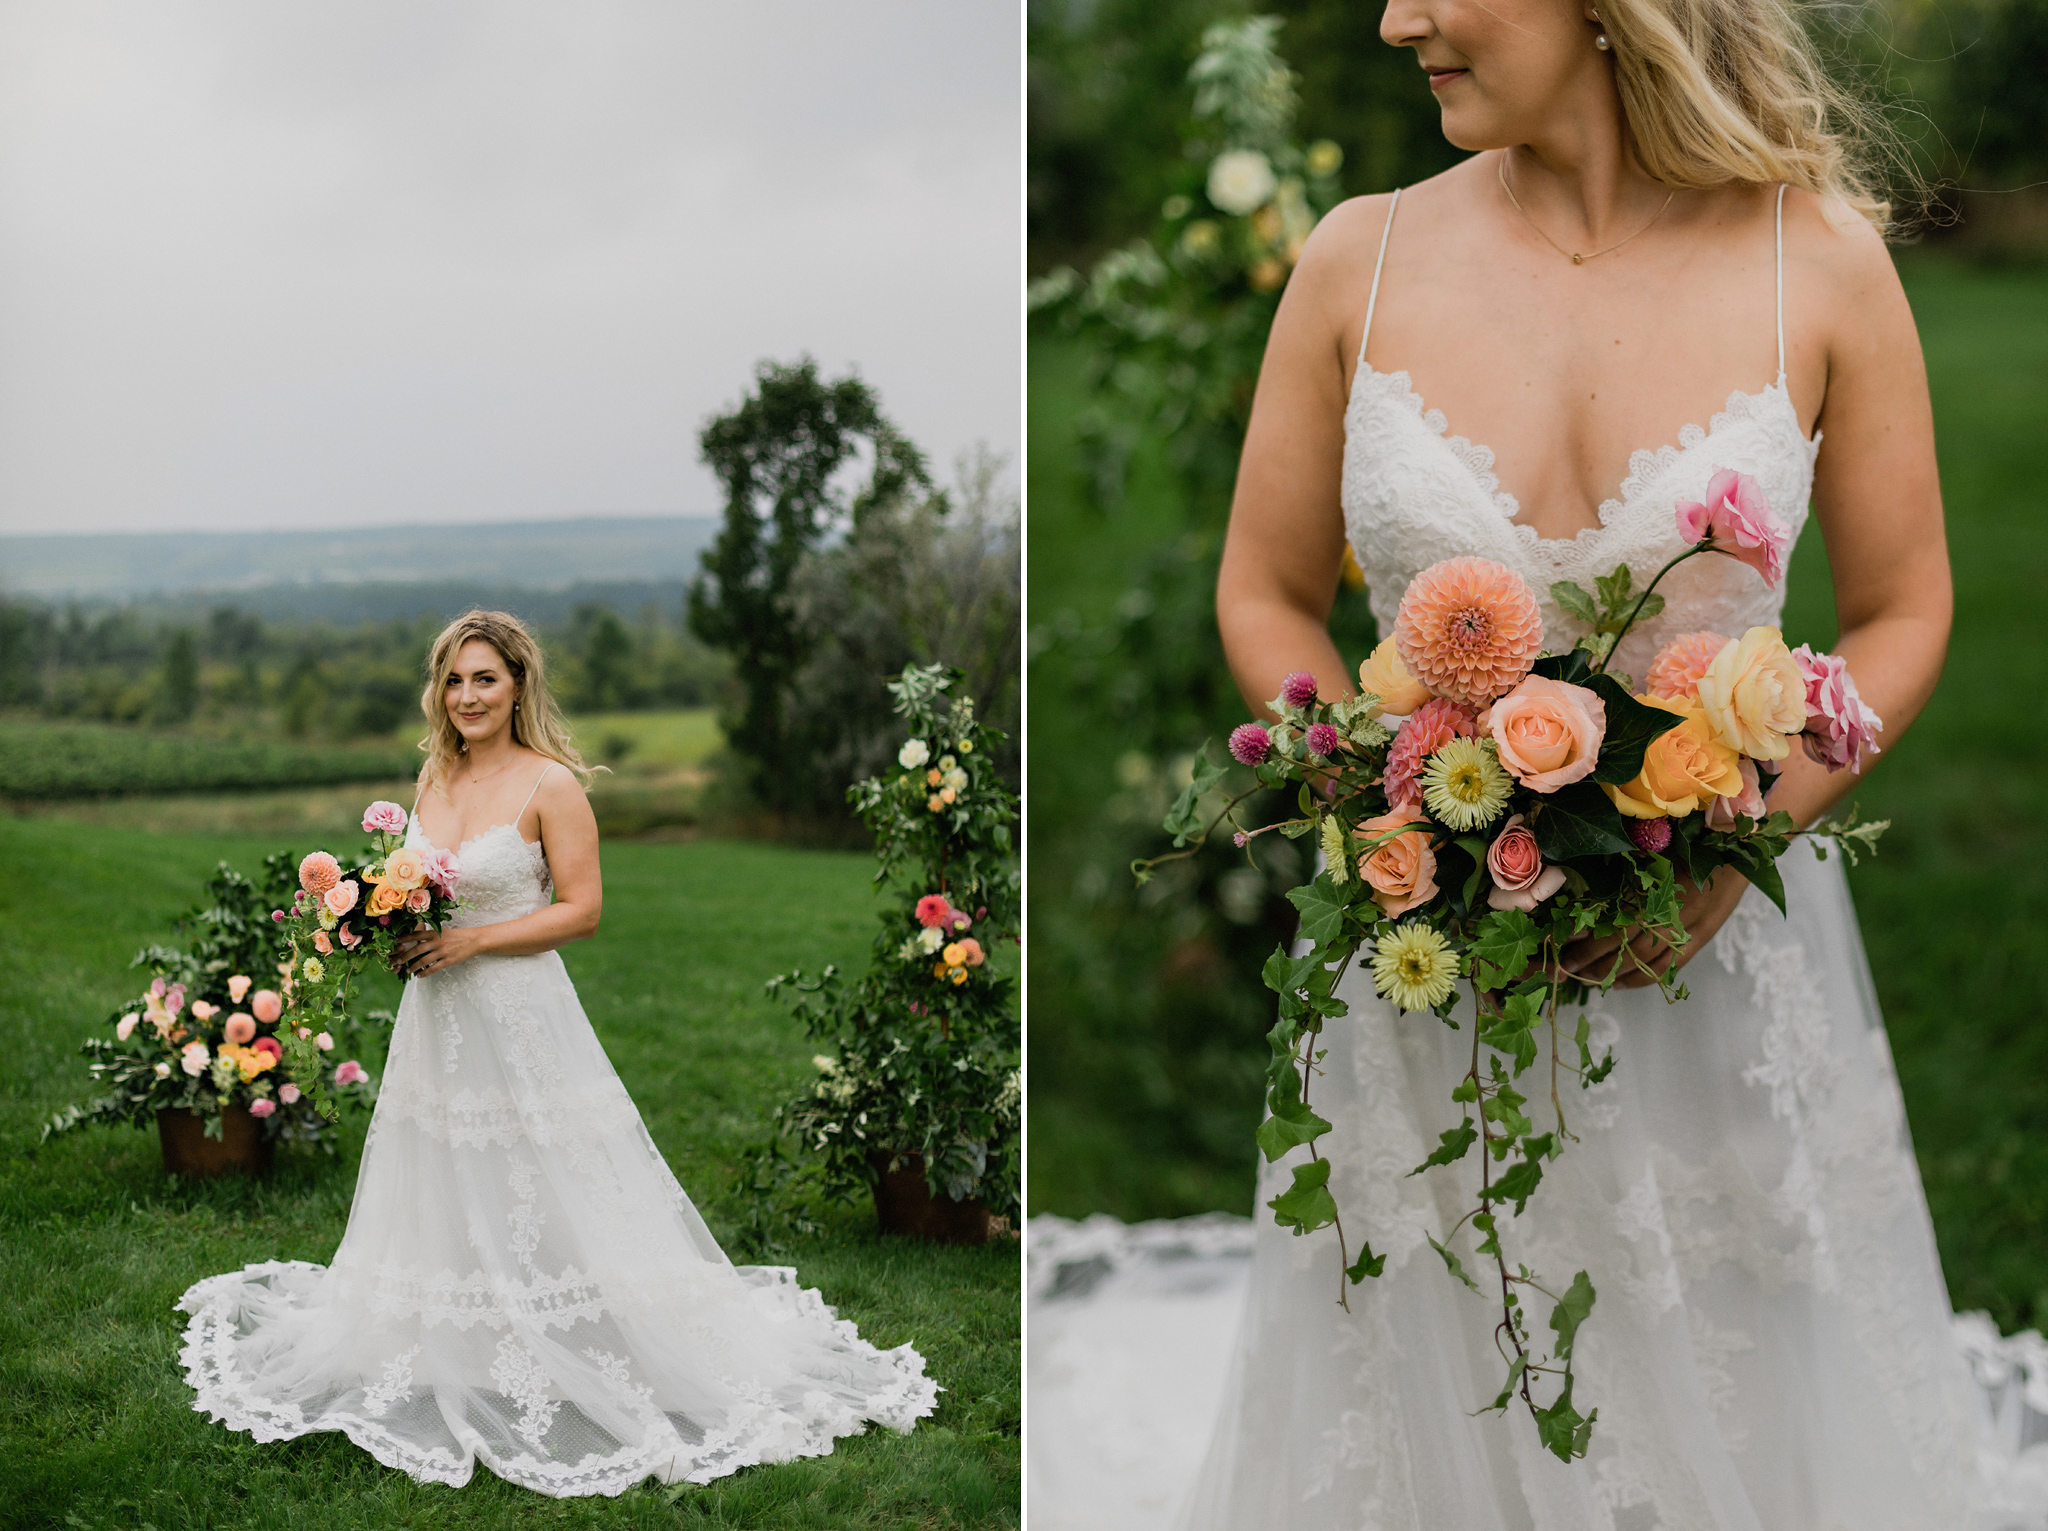 Bride with lace gown, windswept hair and a natural coral bouquet